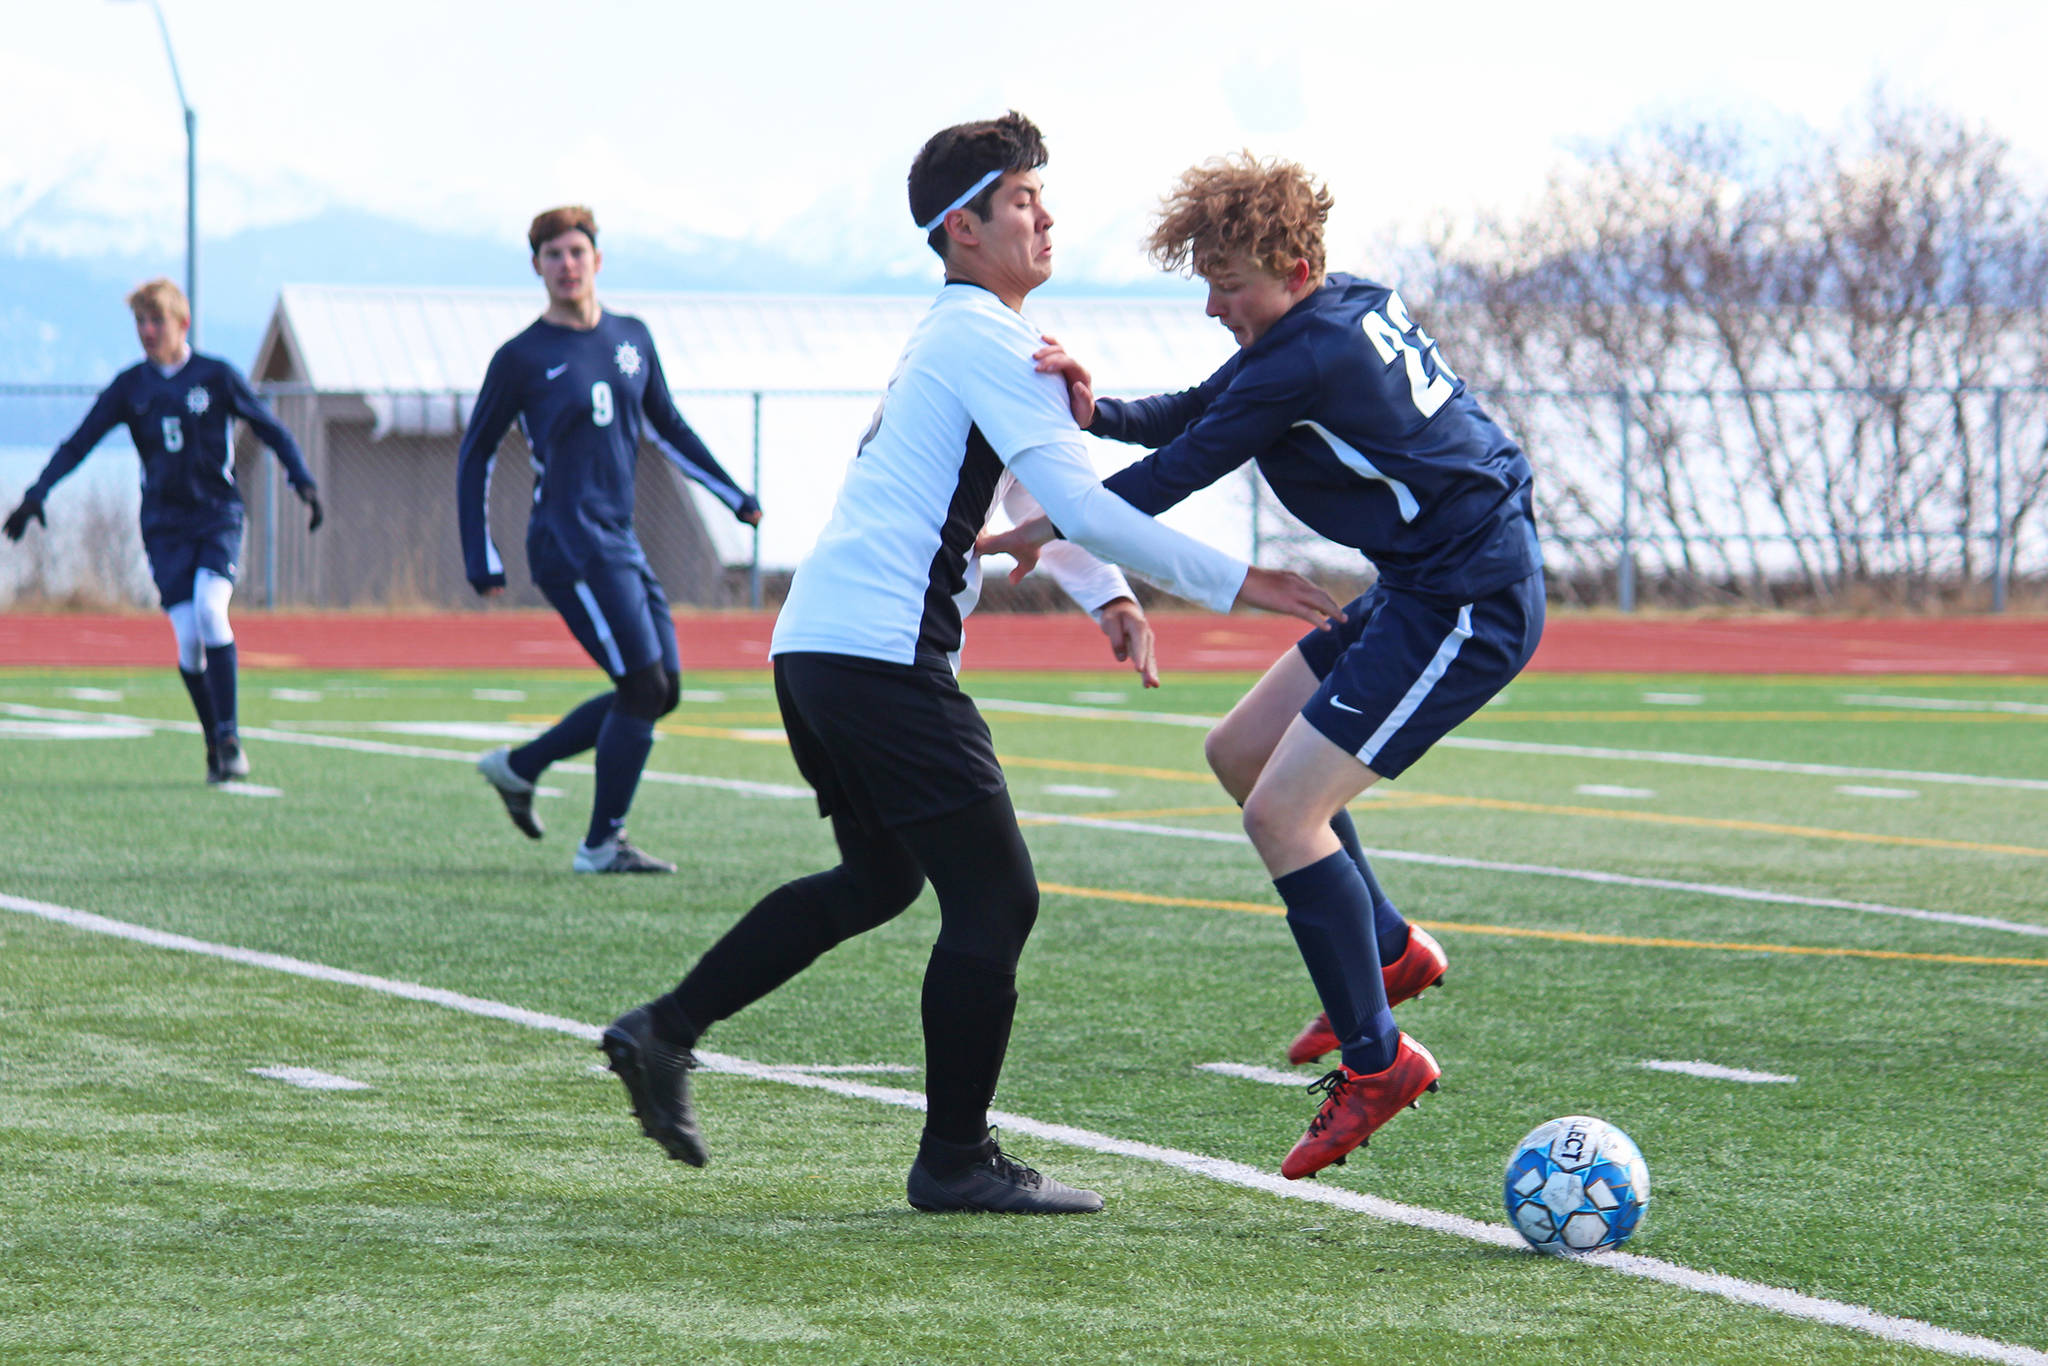 Homer’s Parker Lowney collides with Nikiski’s Shane Weathers during a soccer game Tuesday, April 23, 2019 at Homer High School in Homer, Alaska. (Photo by Megan Pacer/Homer News)